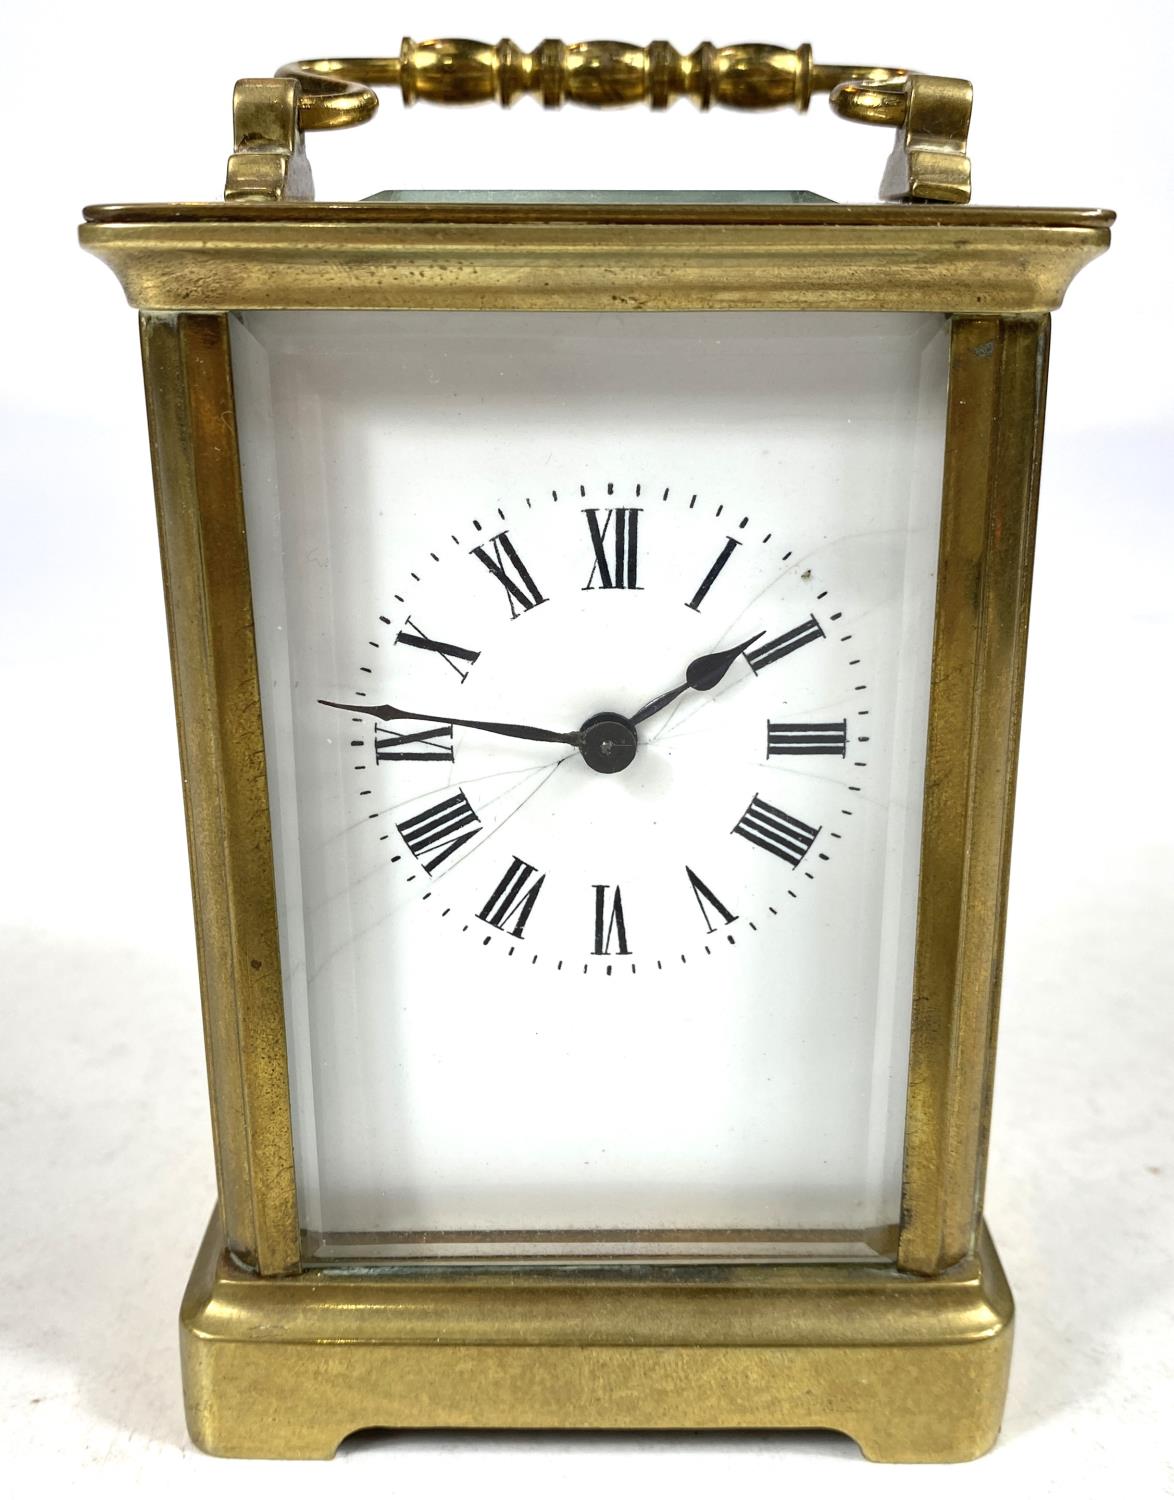 A 19th century French carriage clock with white dial and timepiece movement - Image 2 of 7